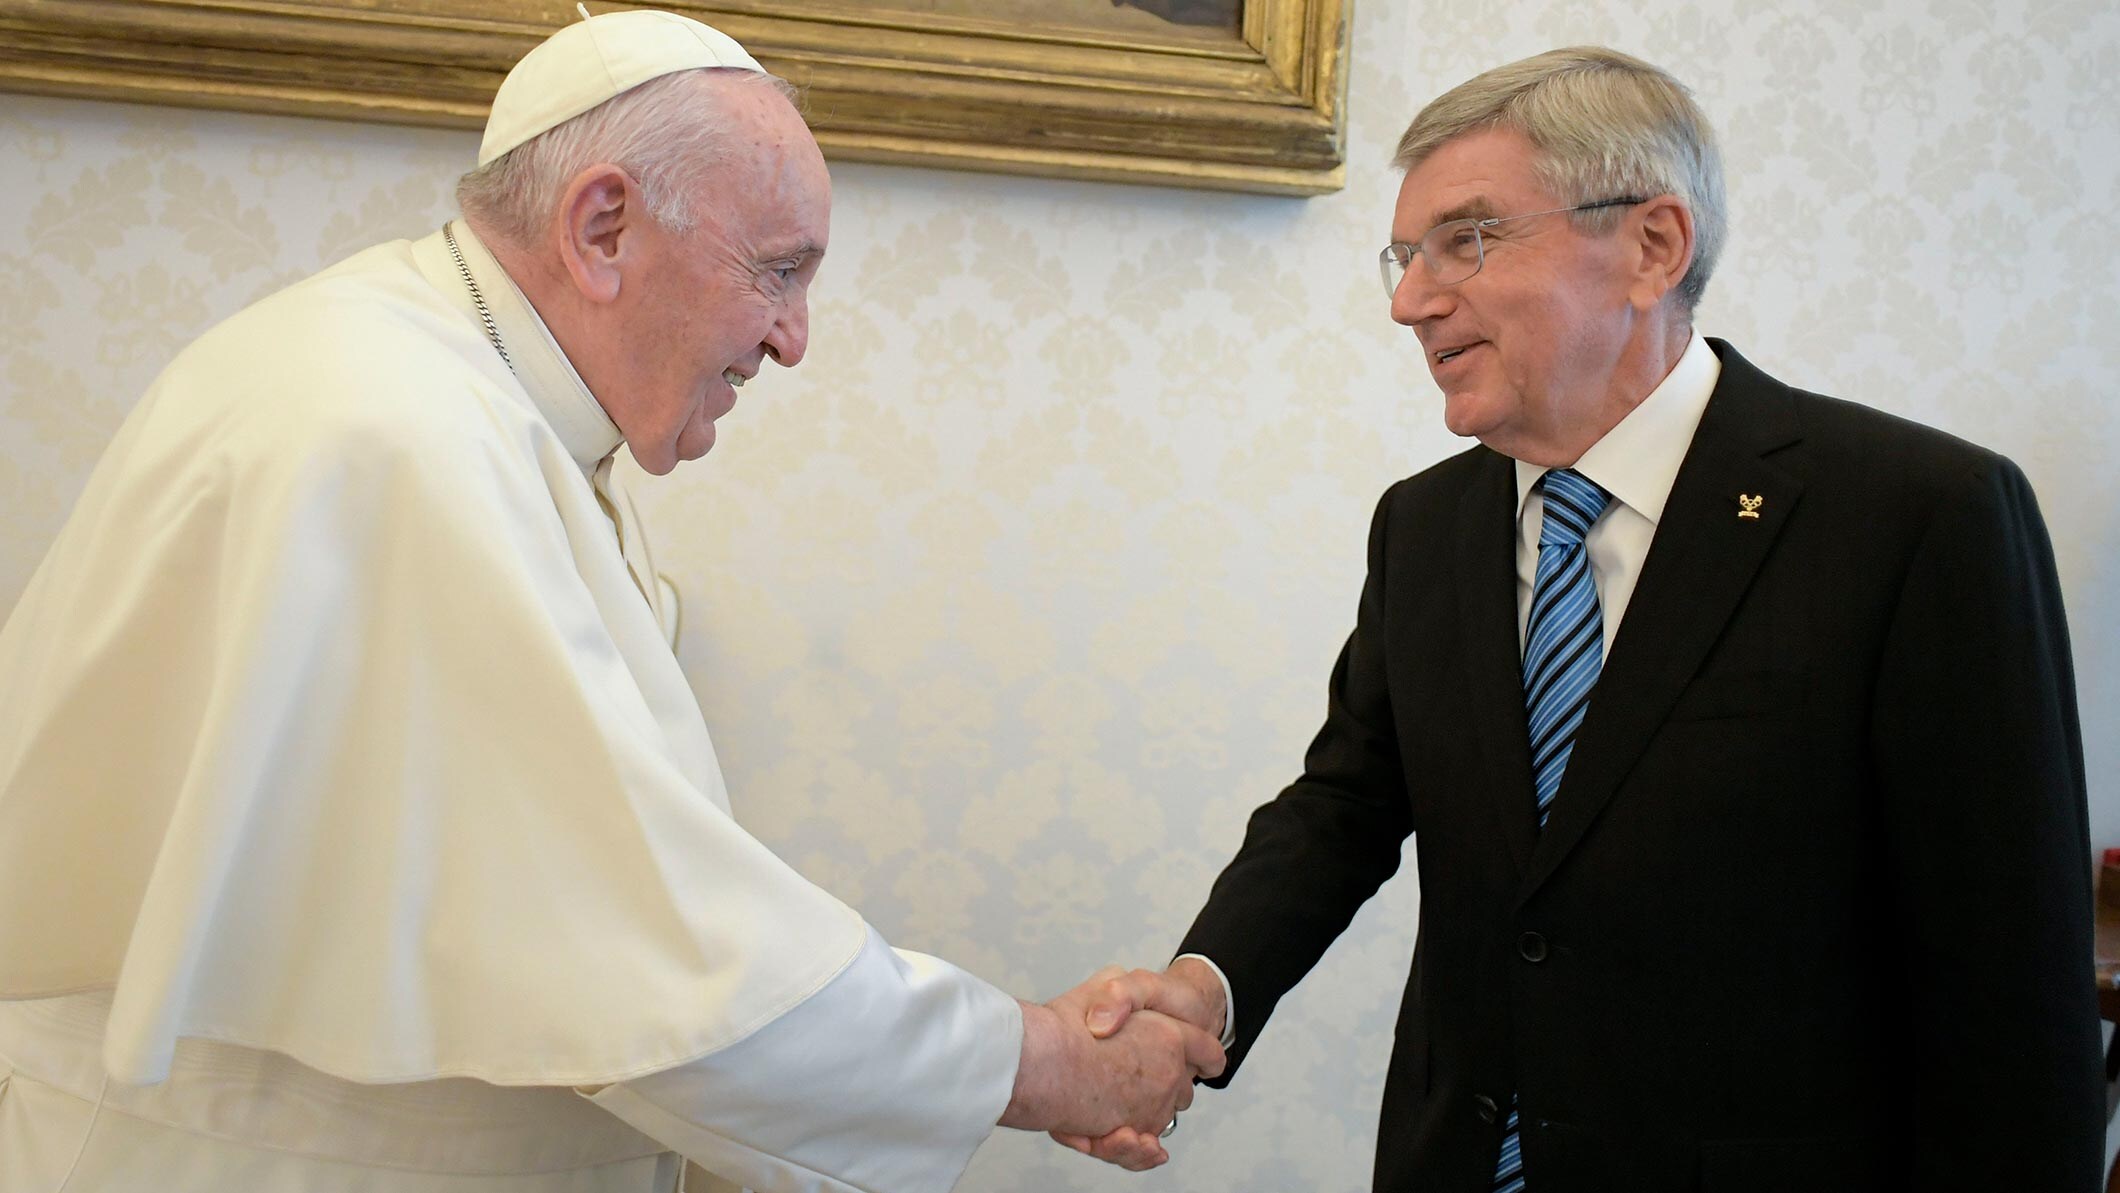 His Holiness Pope Francis received IOC President Thomas Bach for a private audience